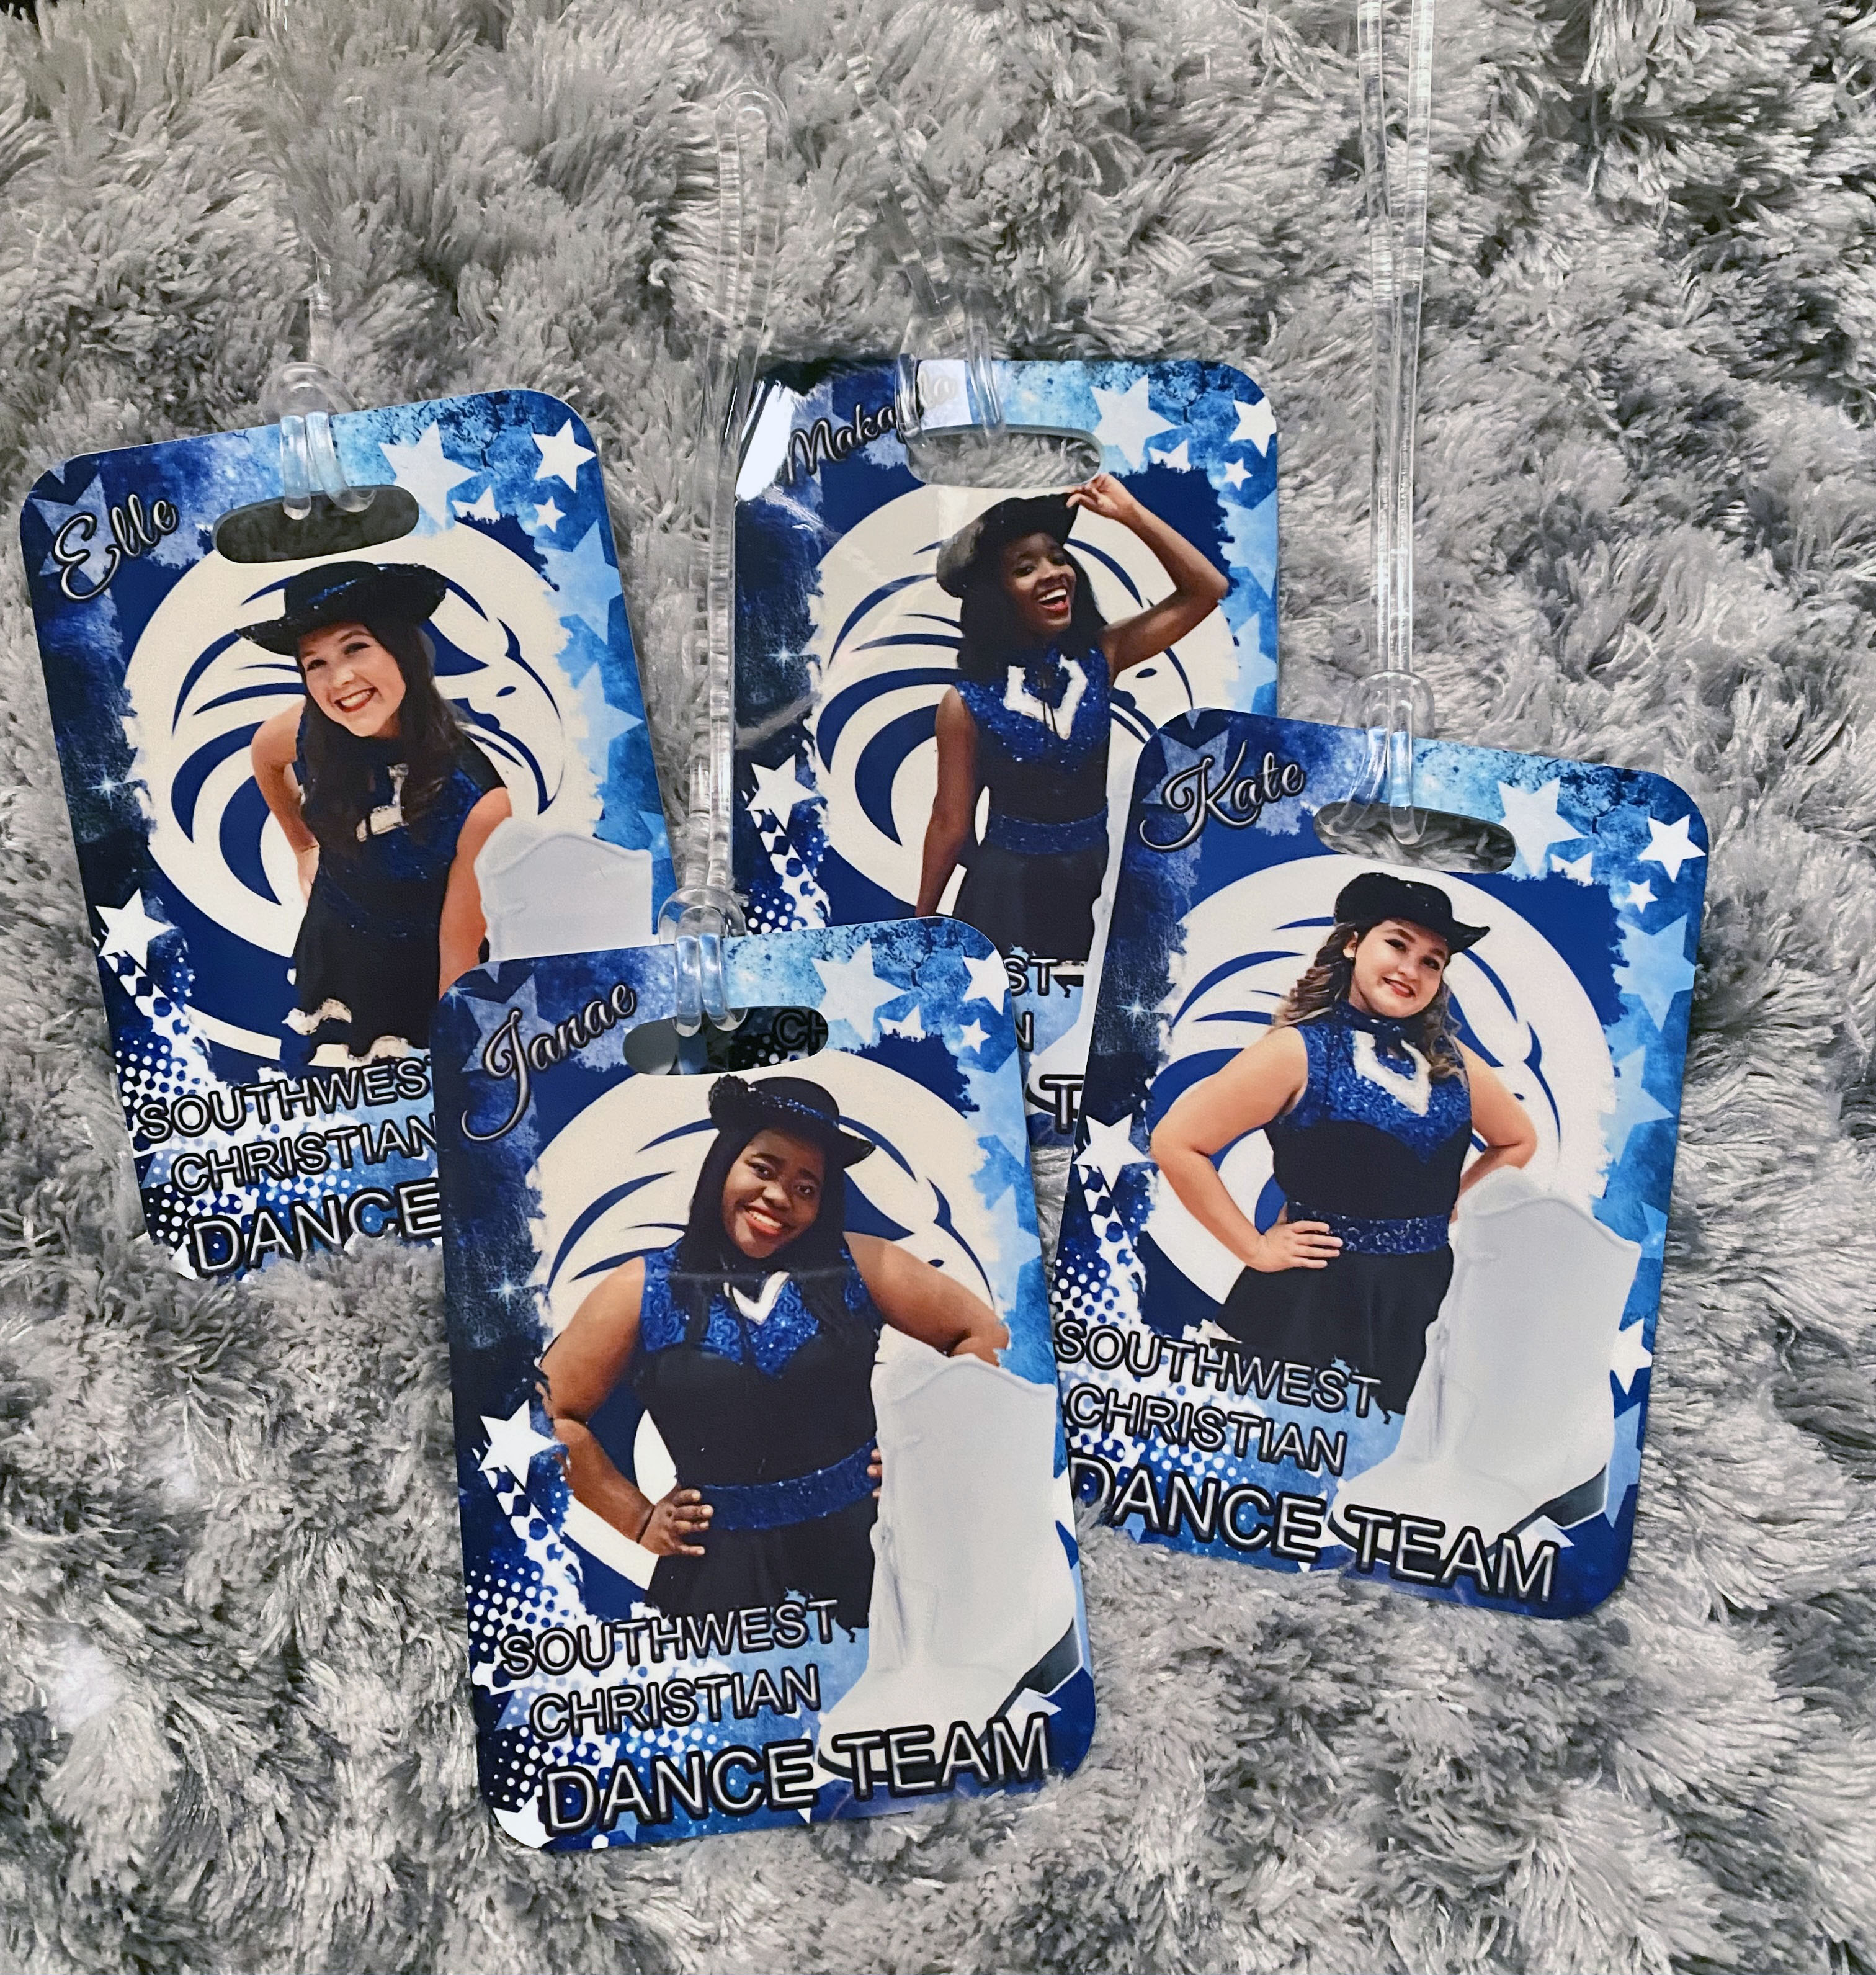 Bag tags for our Dance Team with personalization for dancer's name and school name. Pressed bea